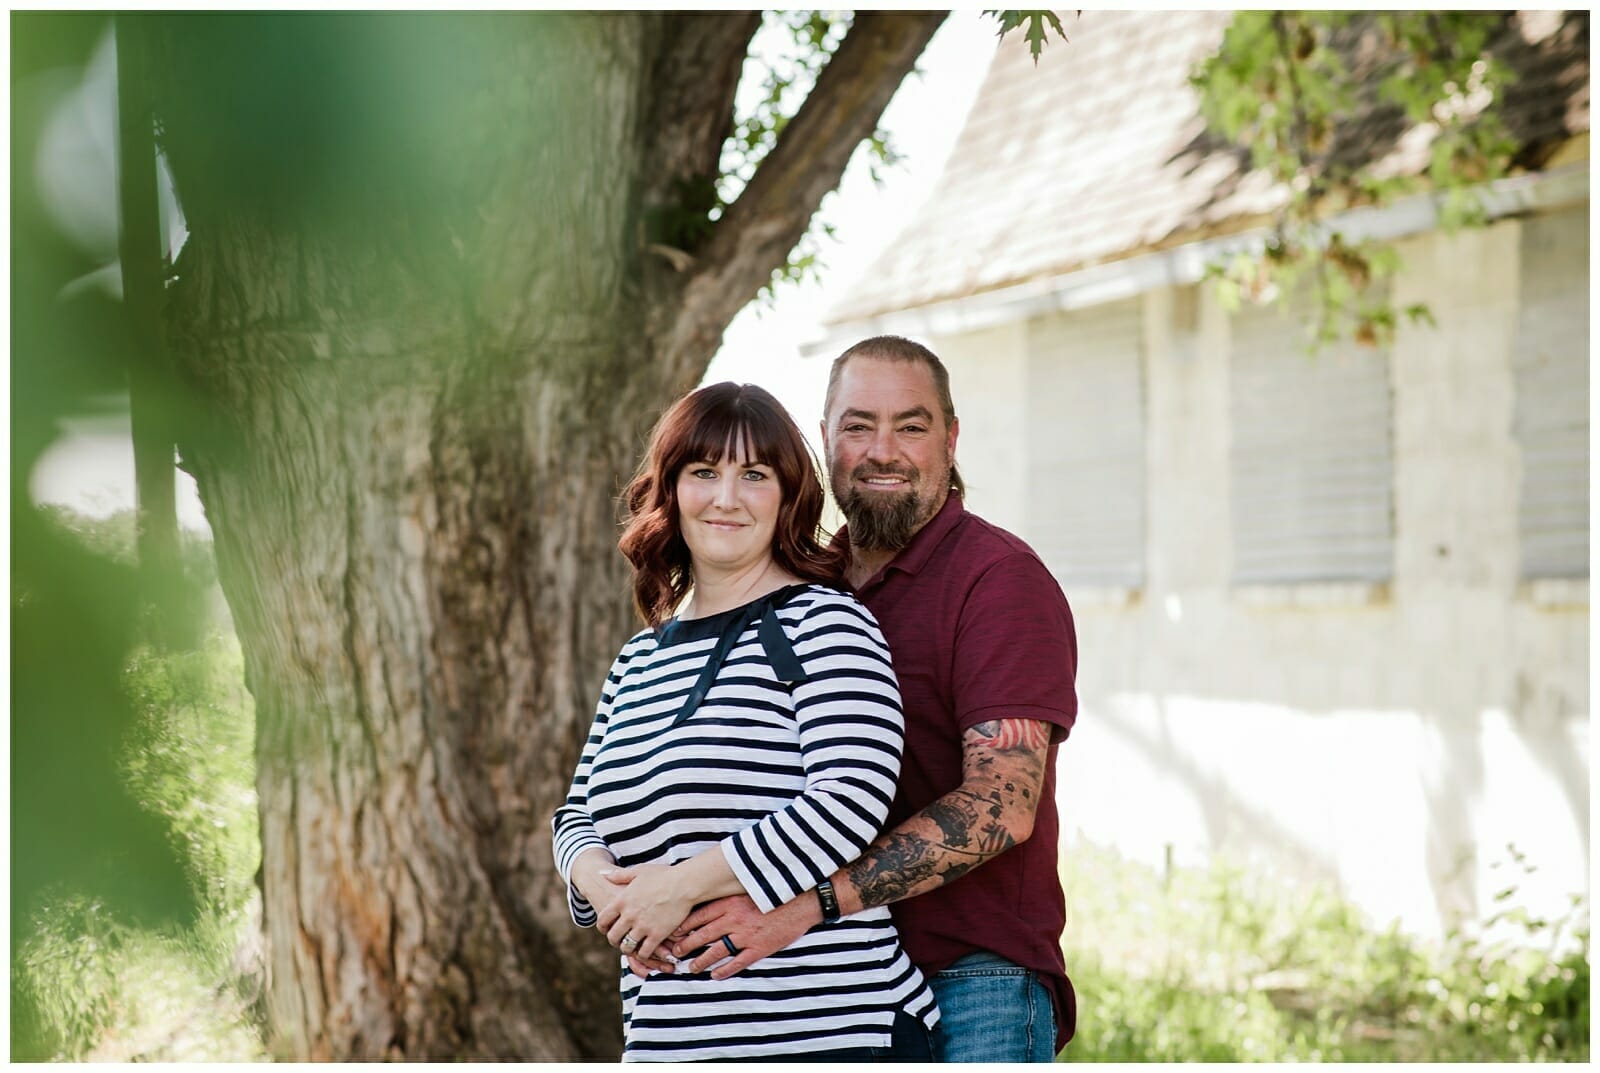 Chrissy Ray Photography - Family Session, Eagle, ID